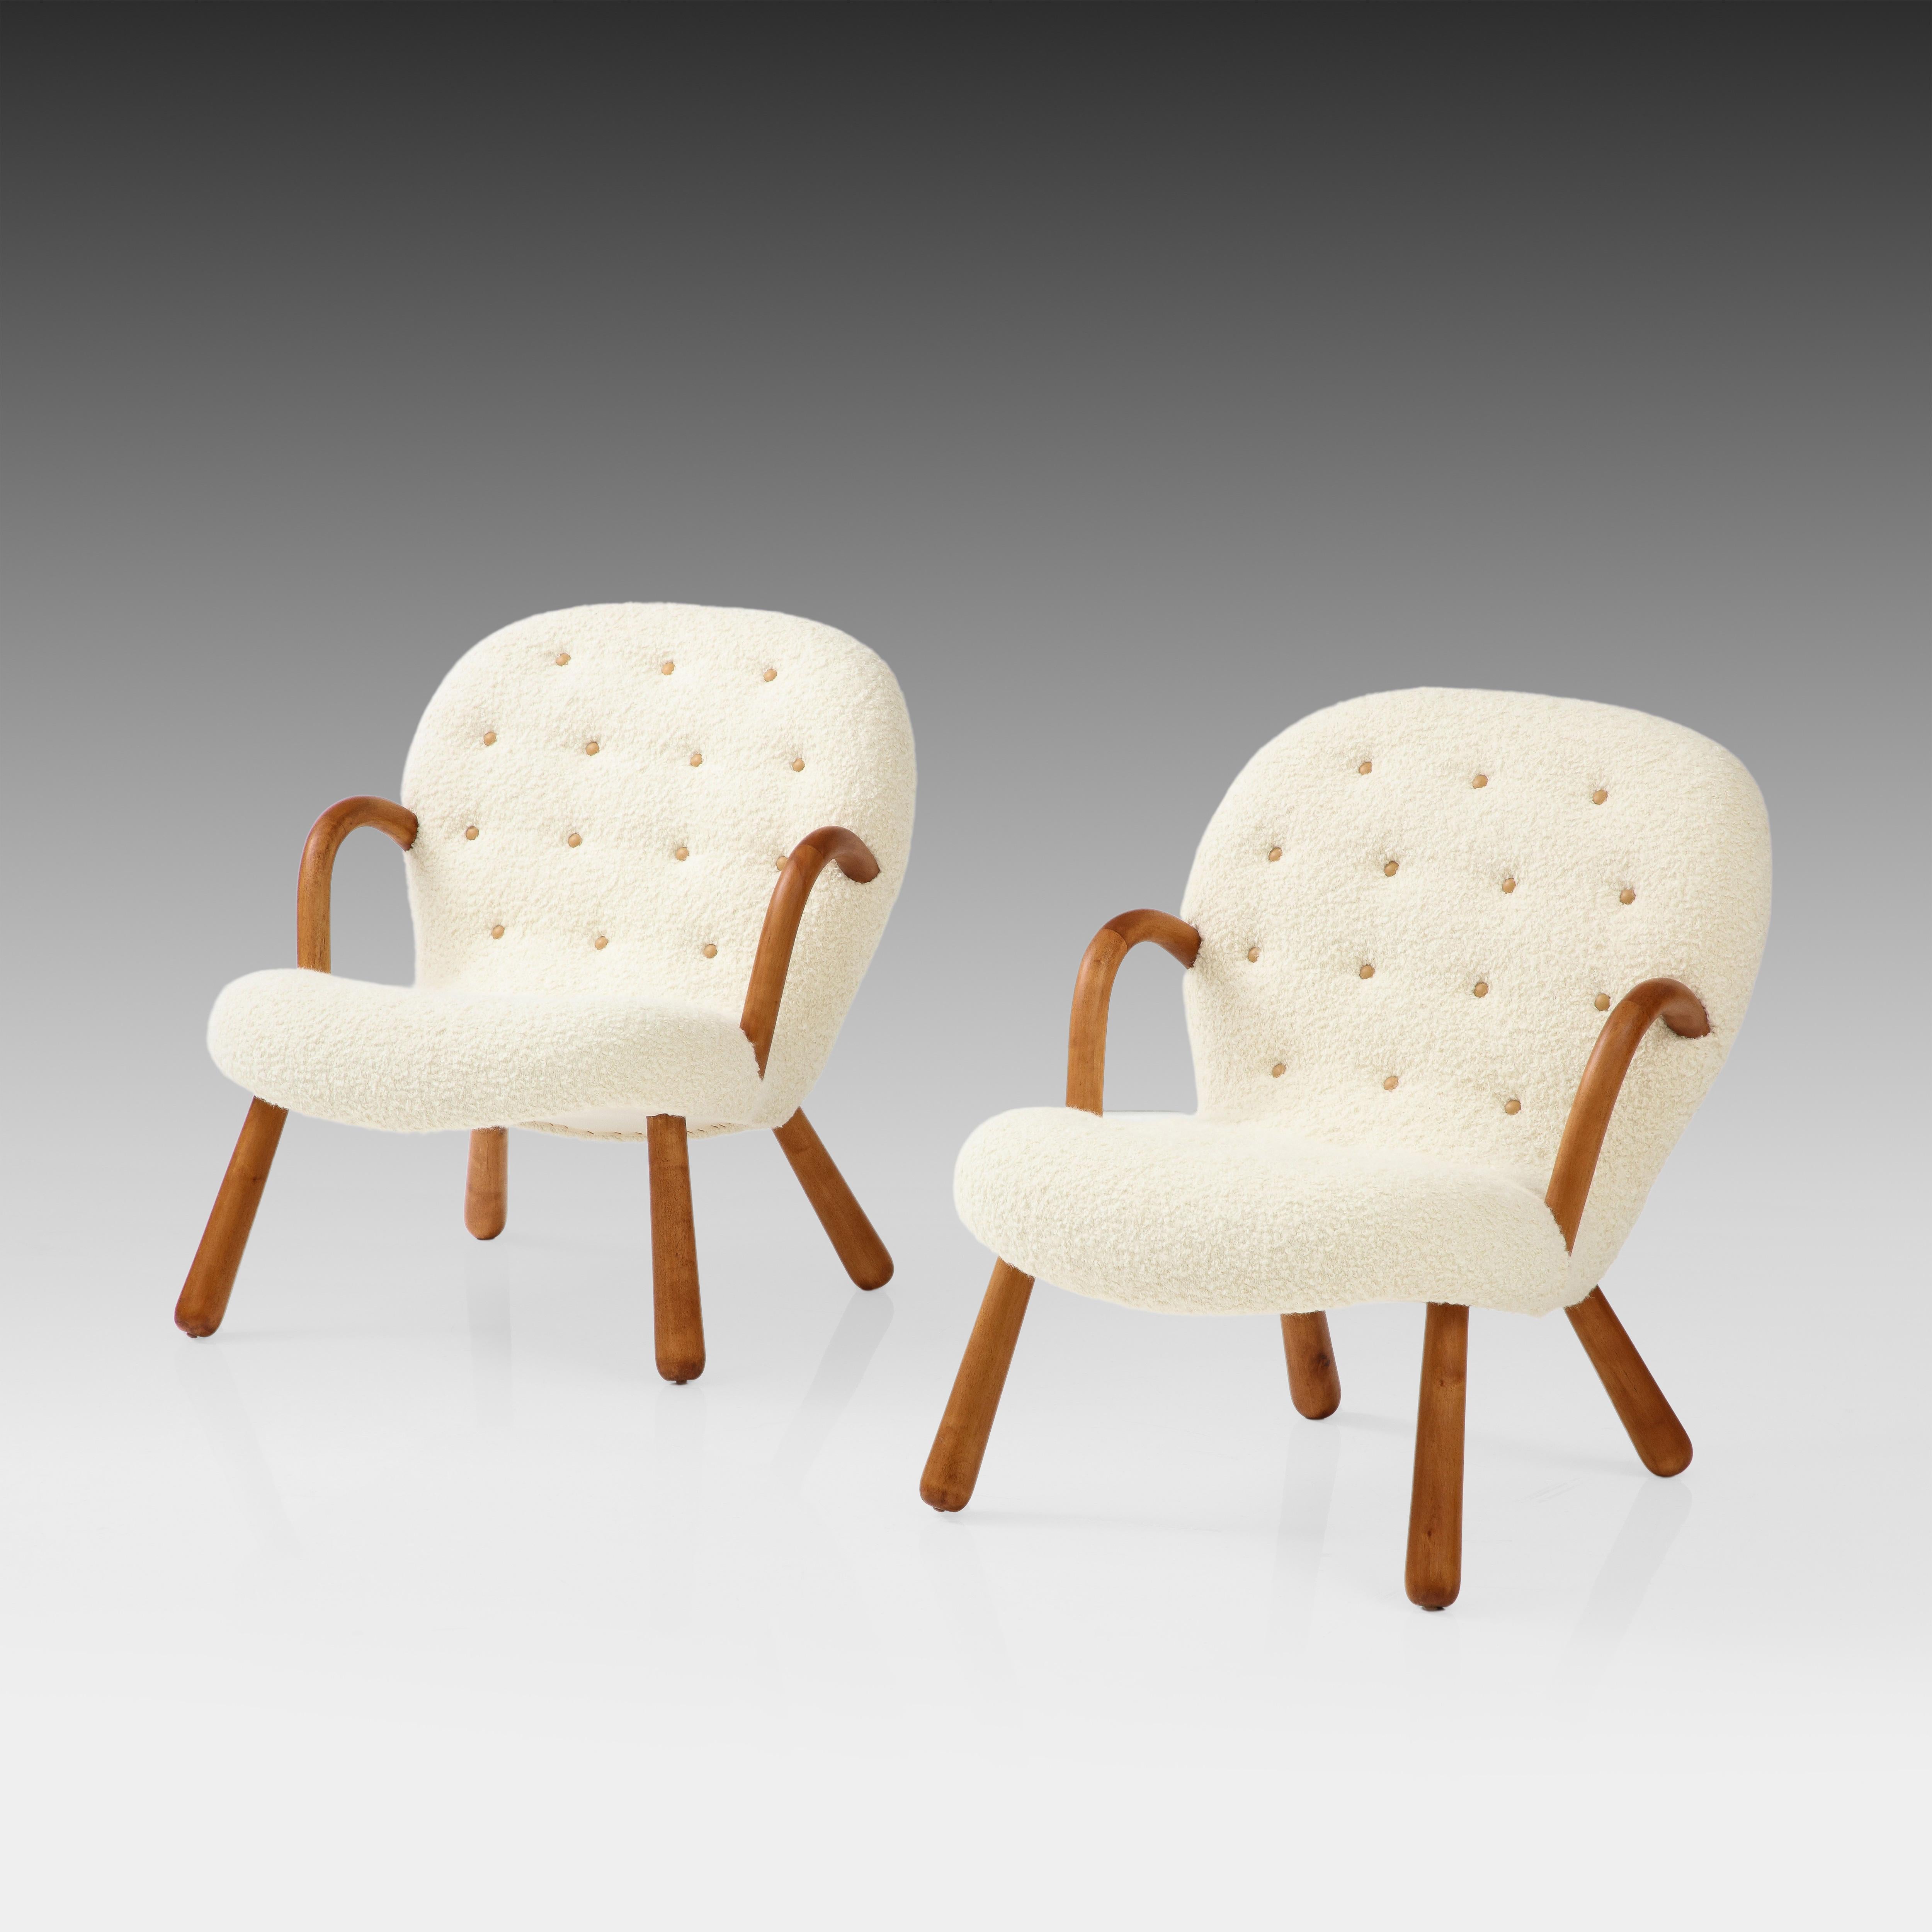 Bouclé Arnold Madsen for Madsen & Schubell Rare Pair of Clam Chairs, Denmark, 1944 For Sale